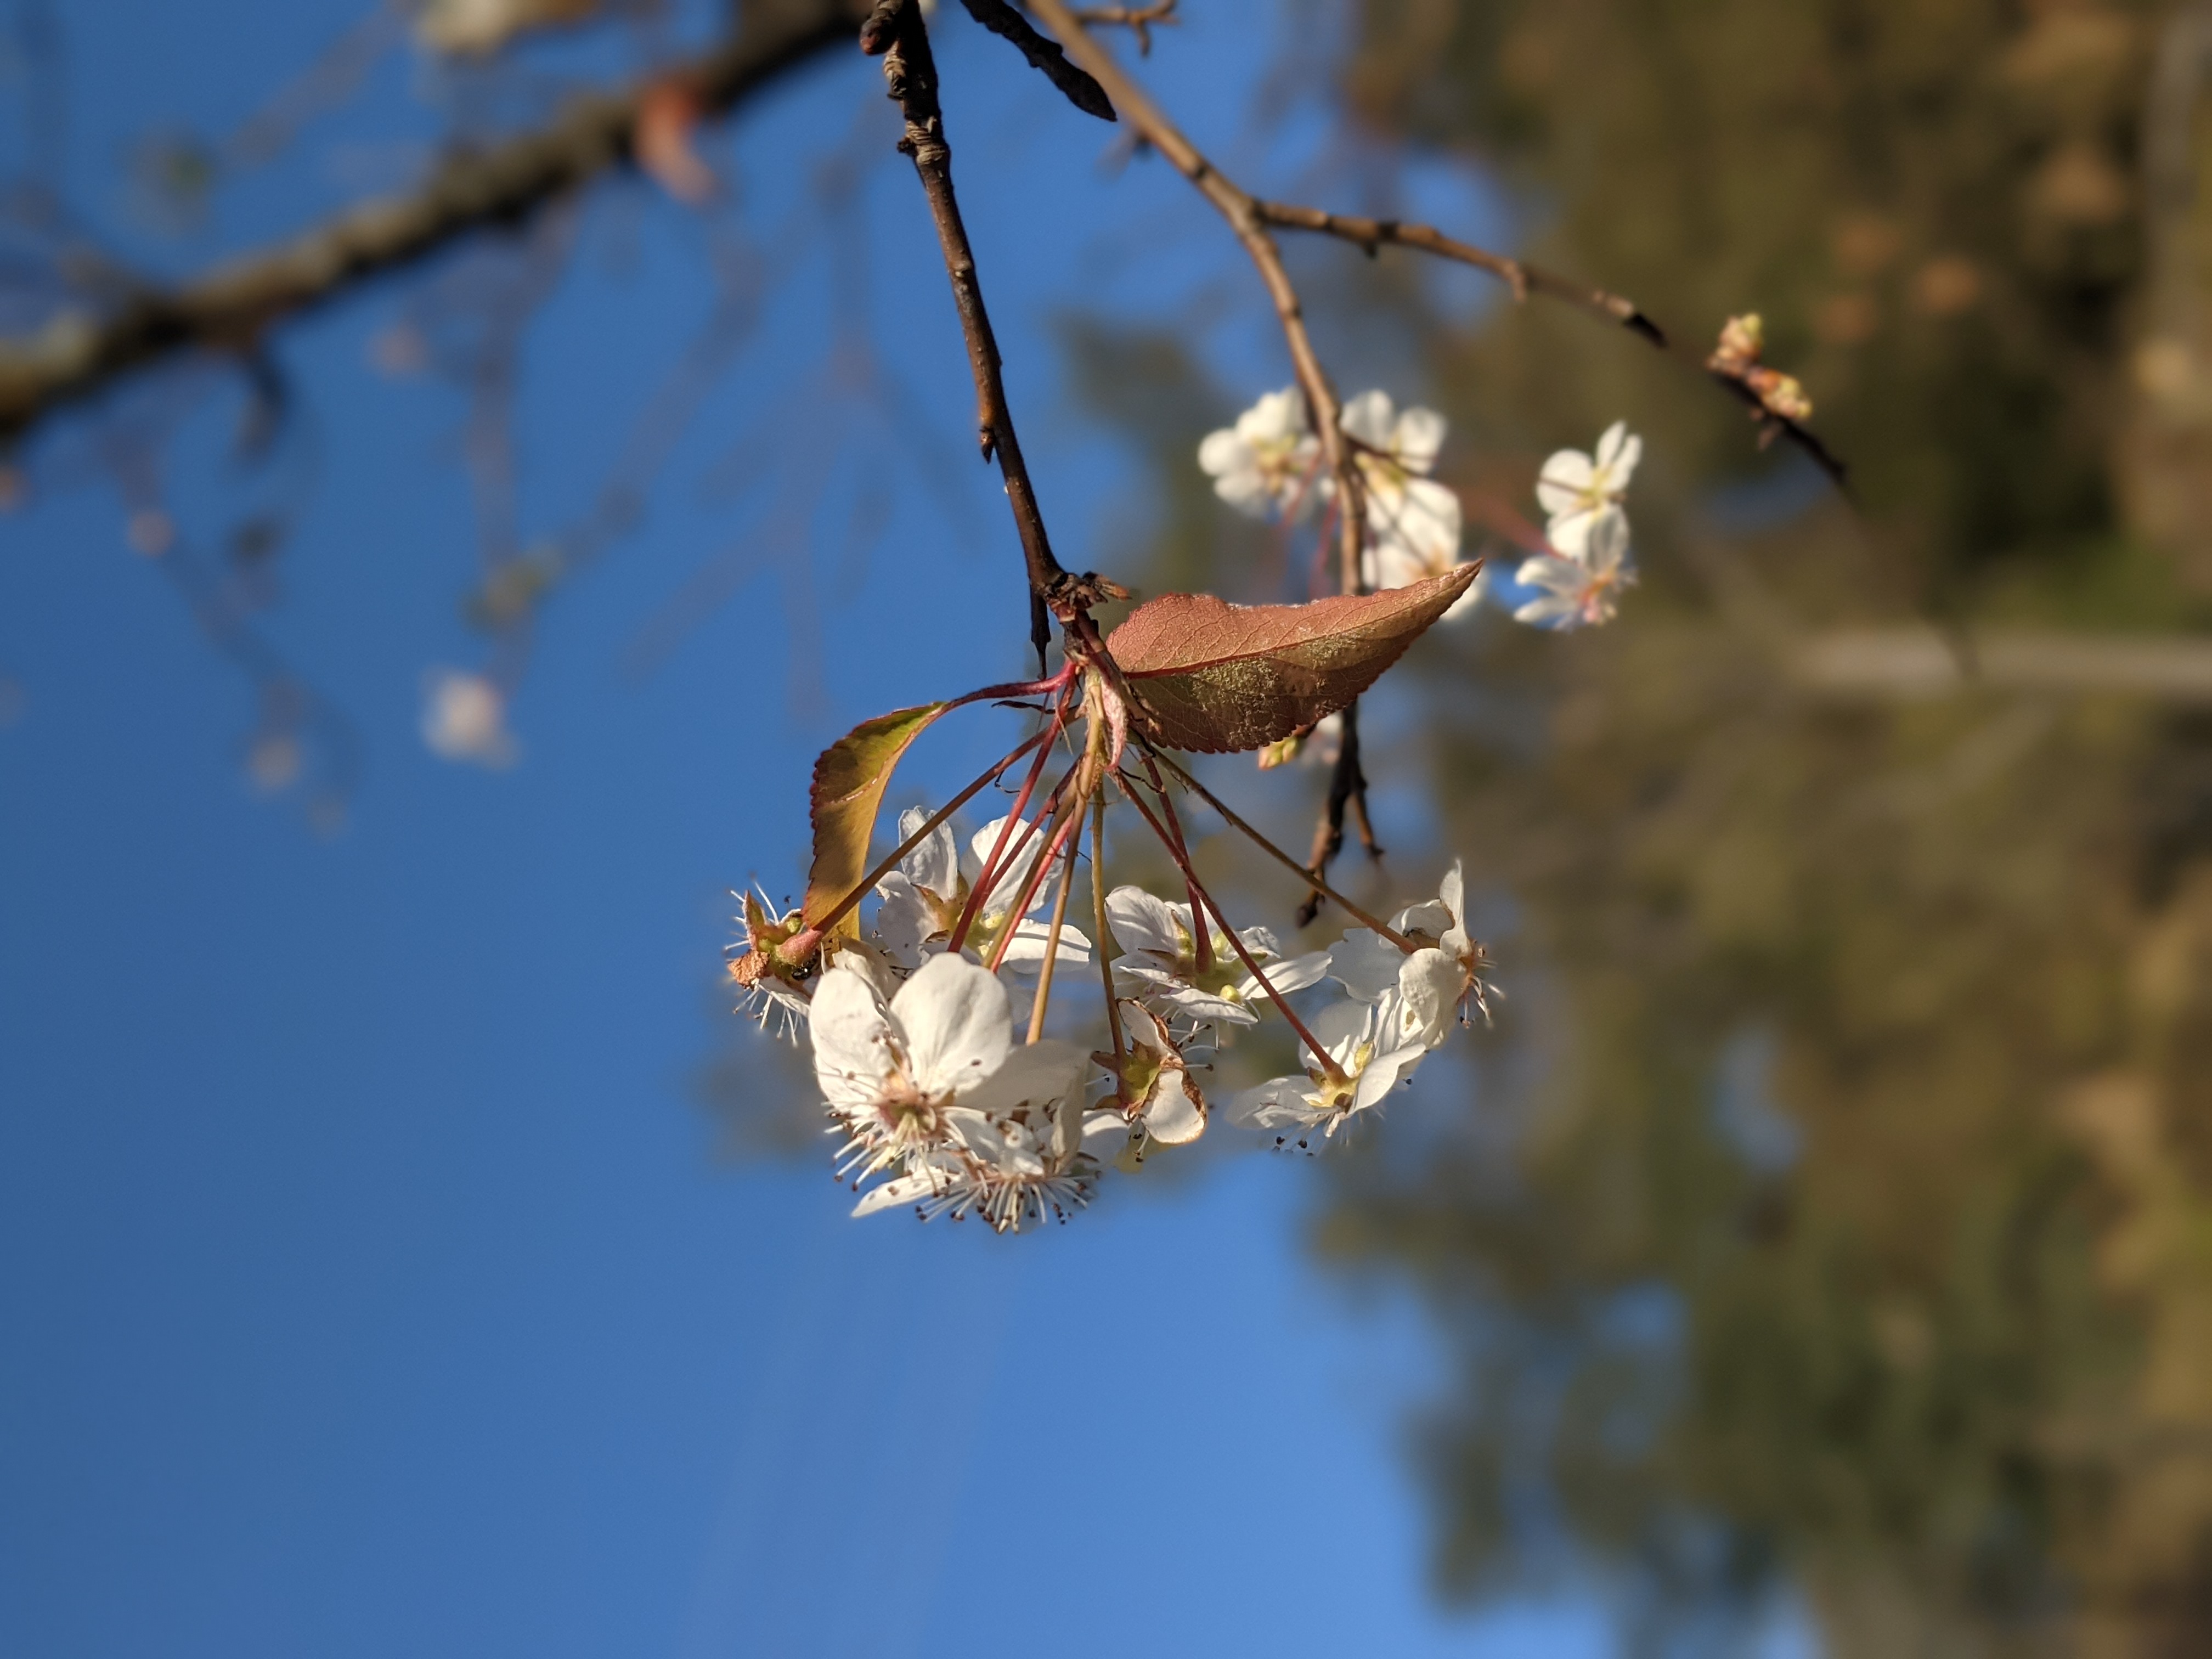 The Himalayan Cherry Blossom